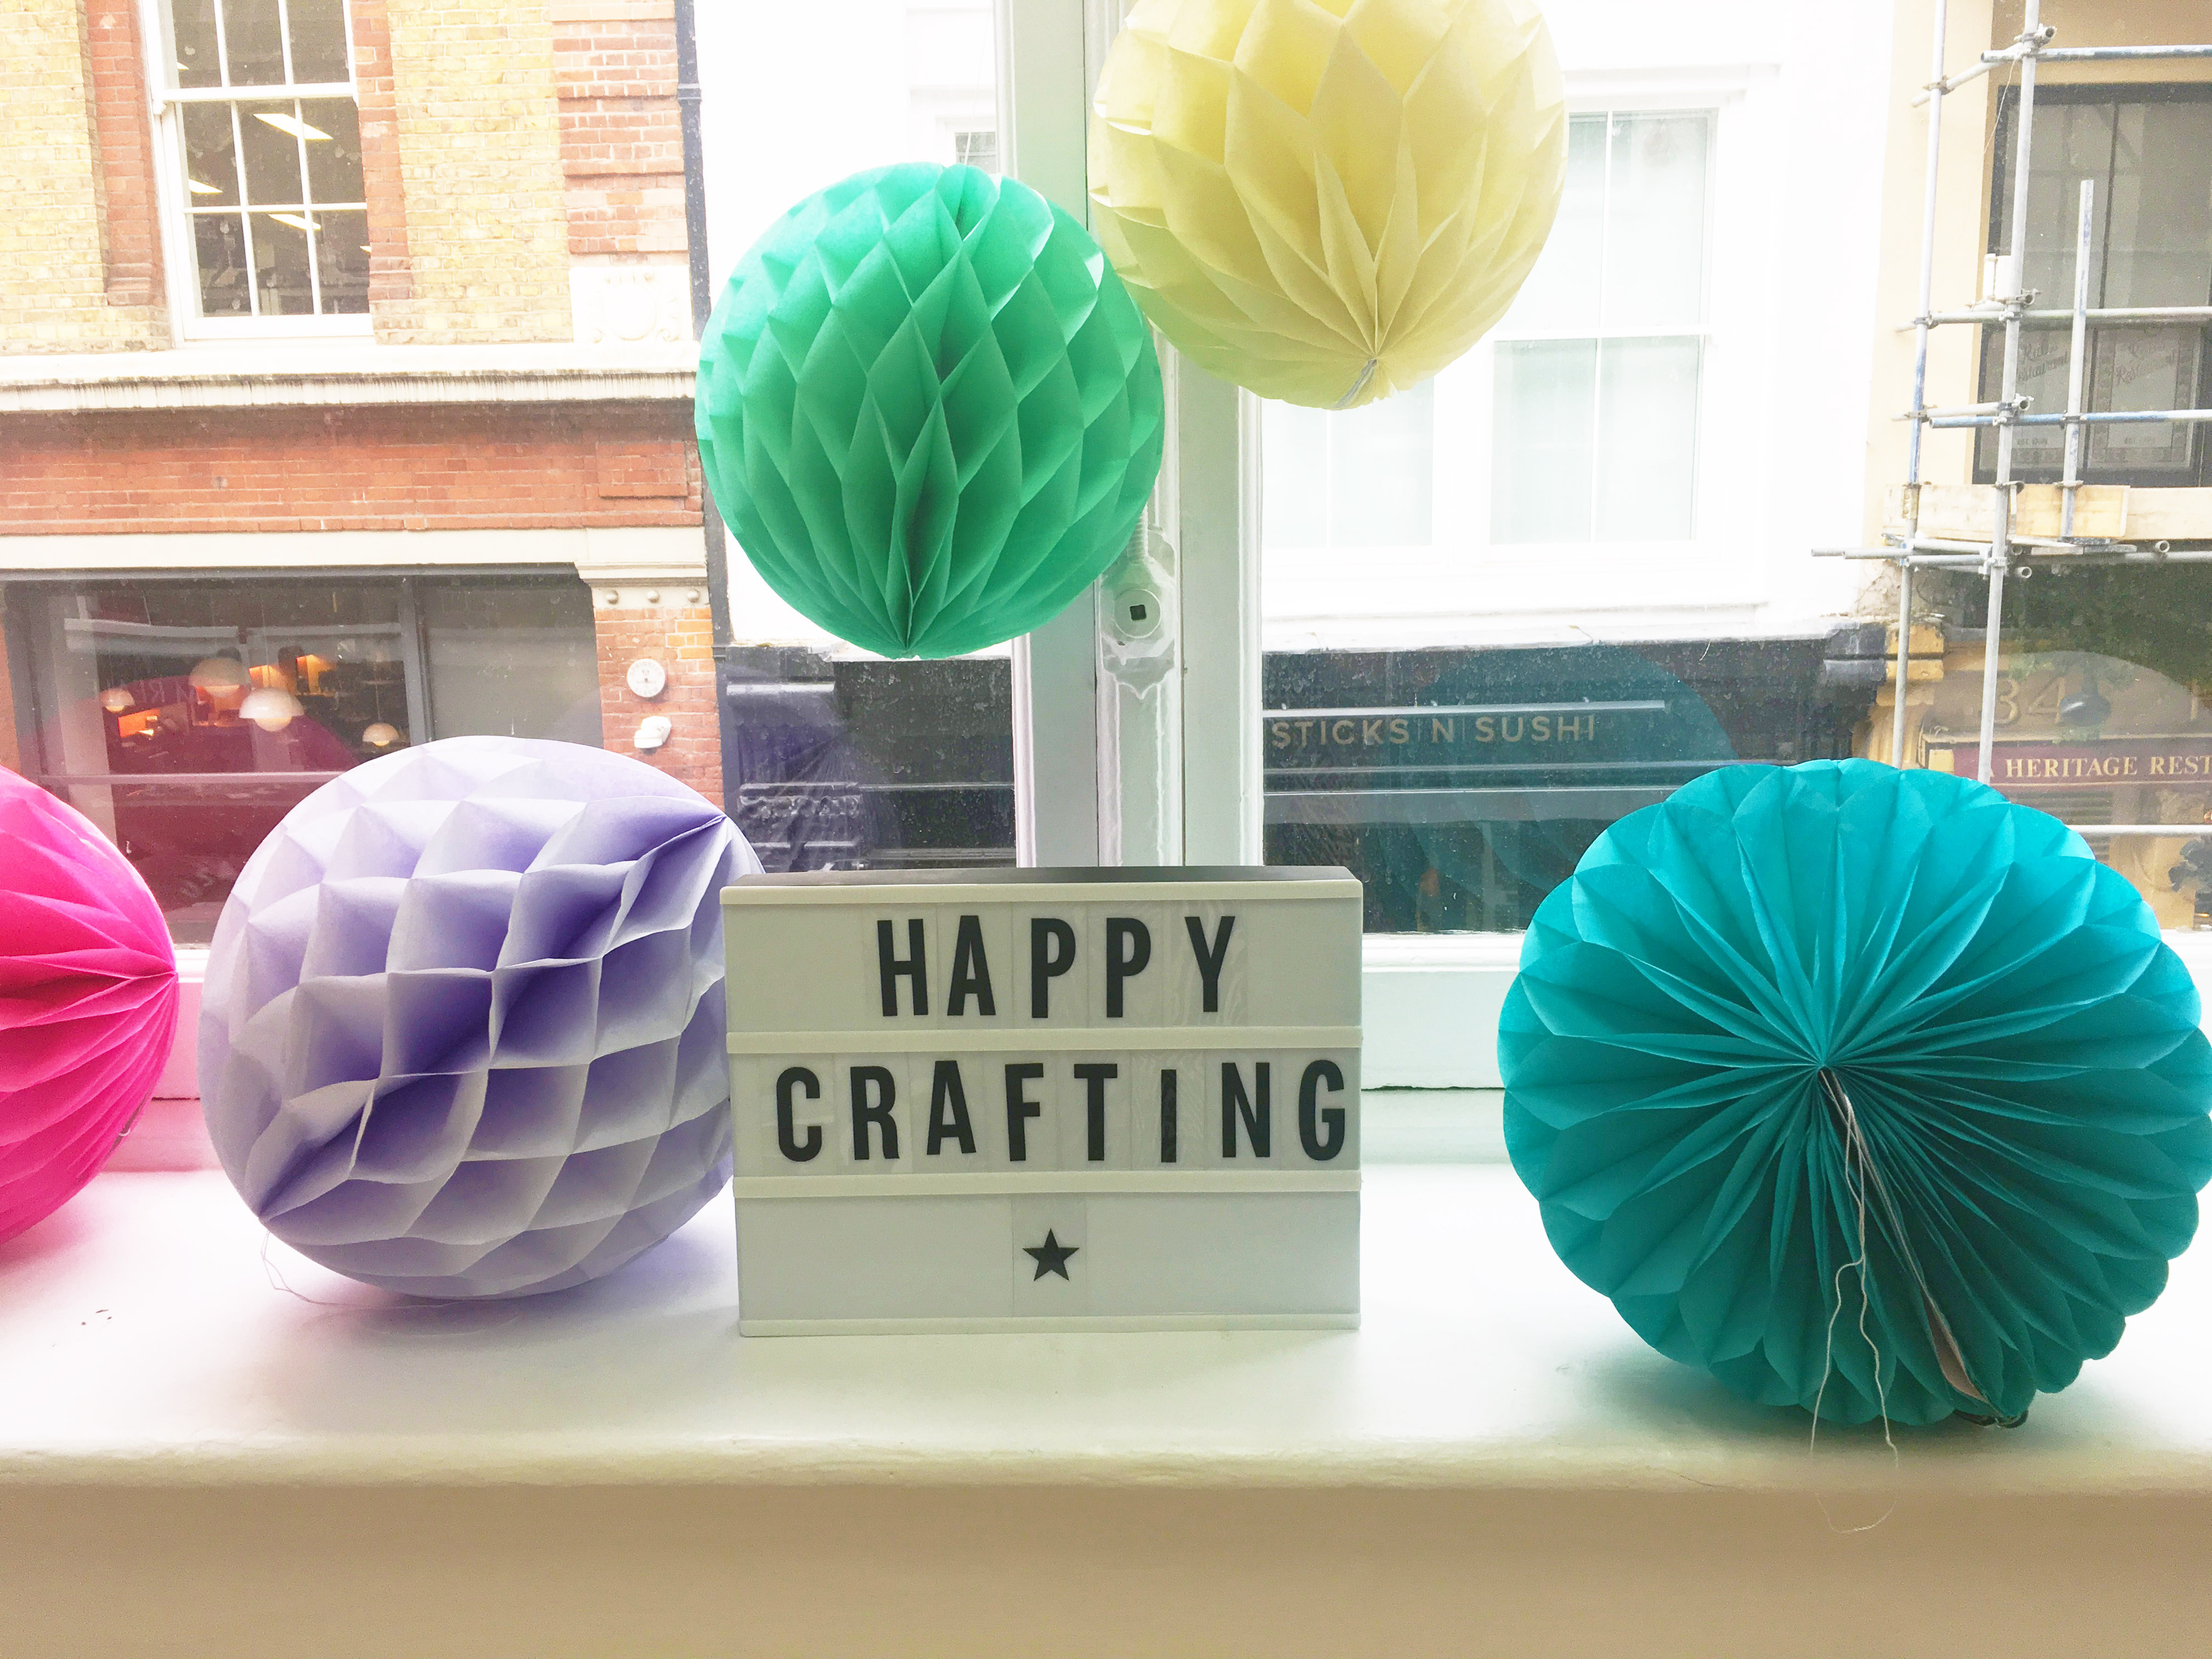 Happy Crafting Lightbox in the window at Tea and Crafting in Covent Garden